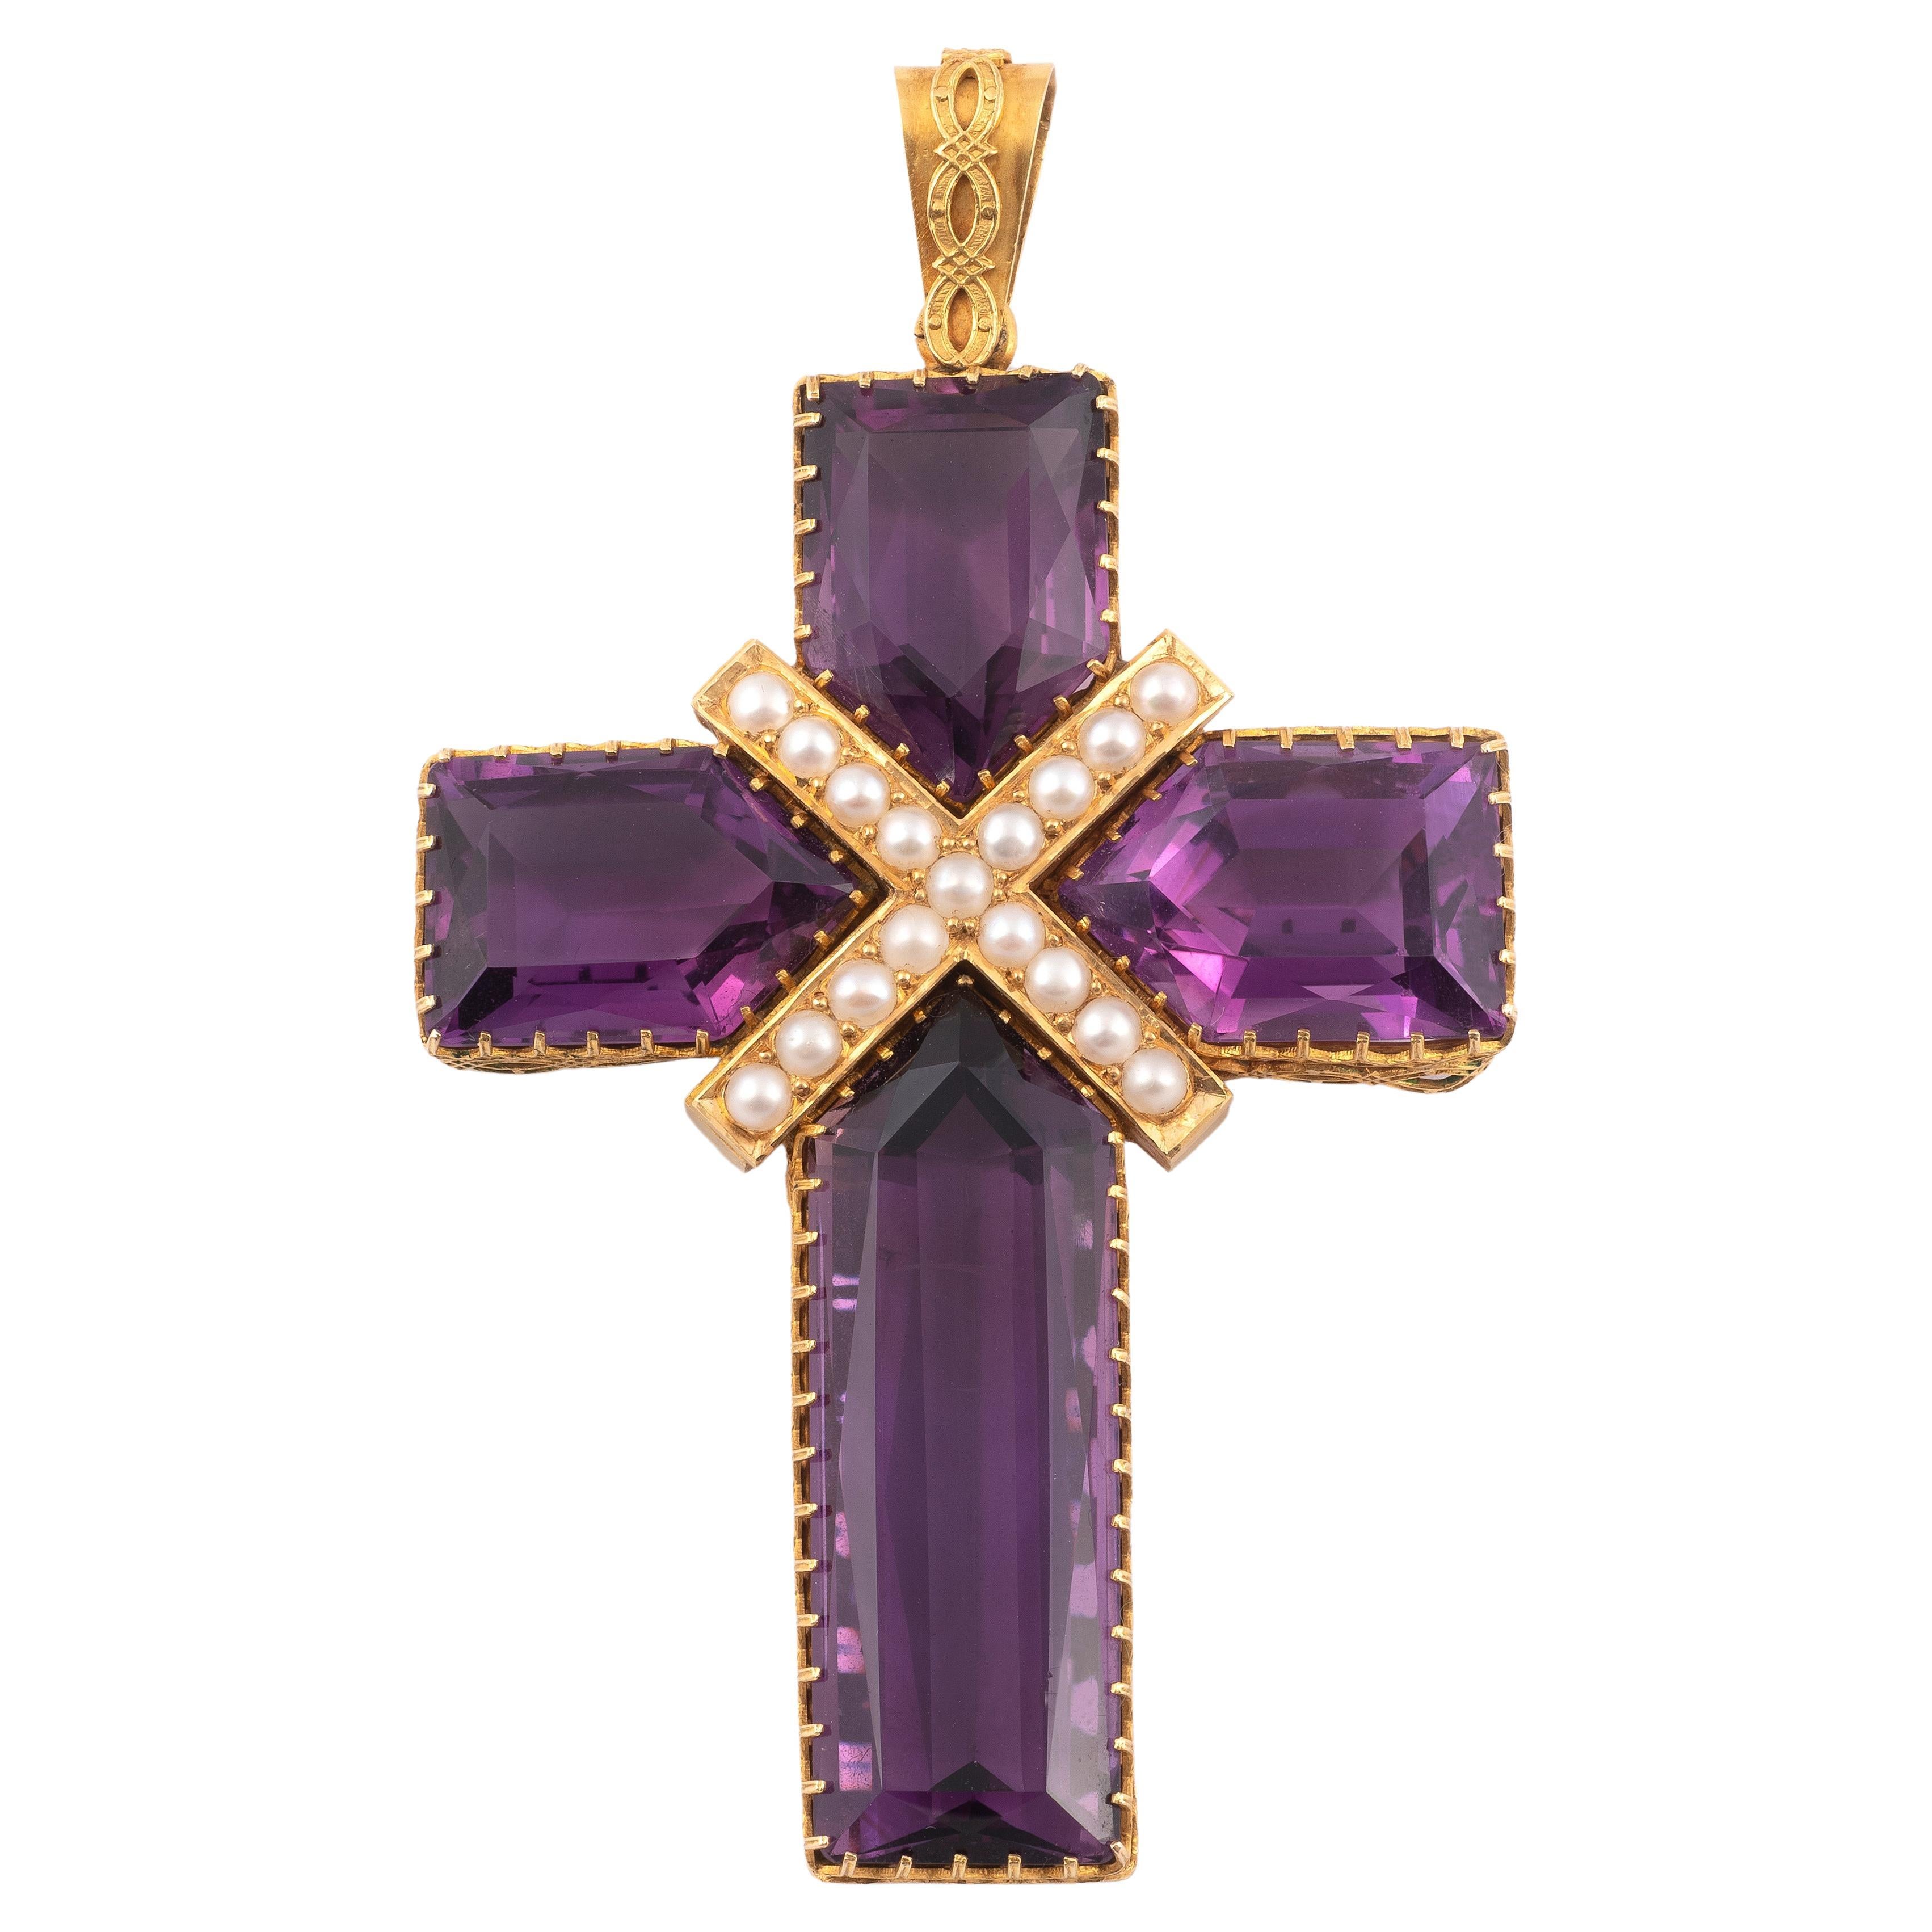 Important cross-pendant composed of 4 step-cut amethysts in claw setting, centered with a Saint Andrew's cross adorned with a line of pearls. The yellow gold setting is embellished with a frieze of interlacing, the bail with the motif.
Dimensions: